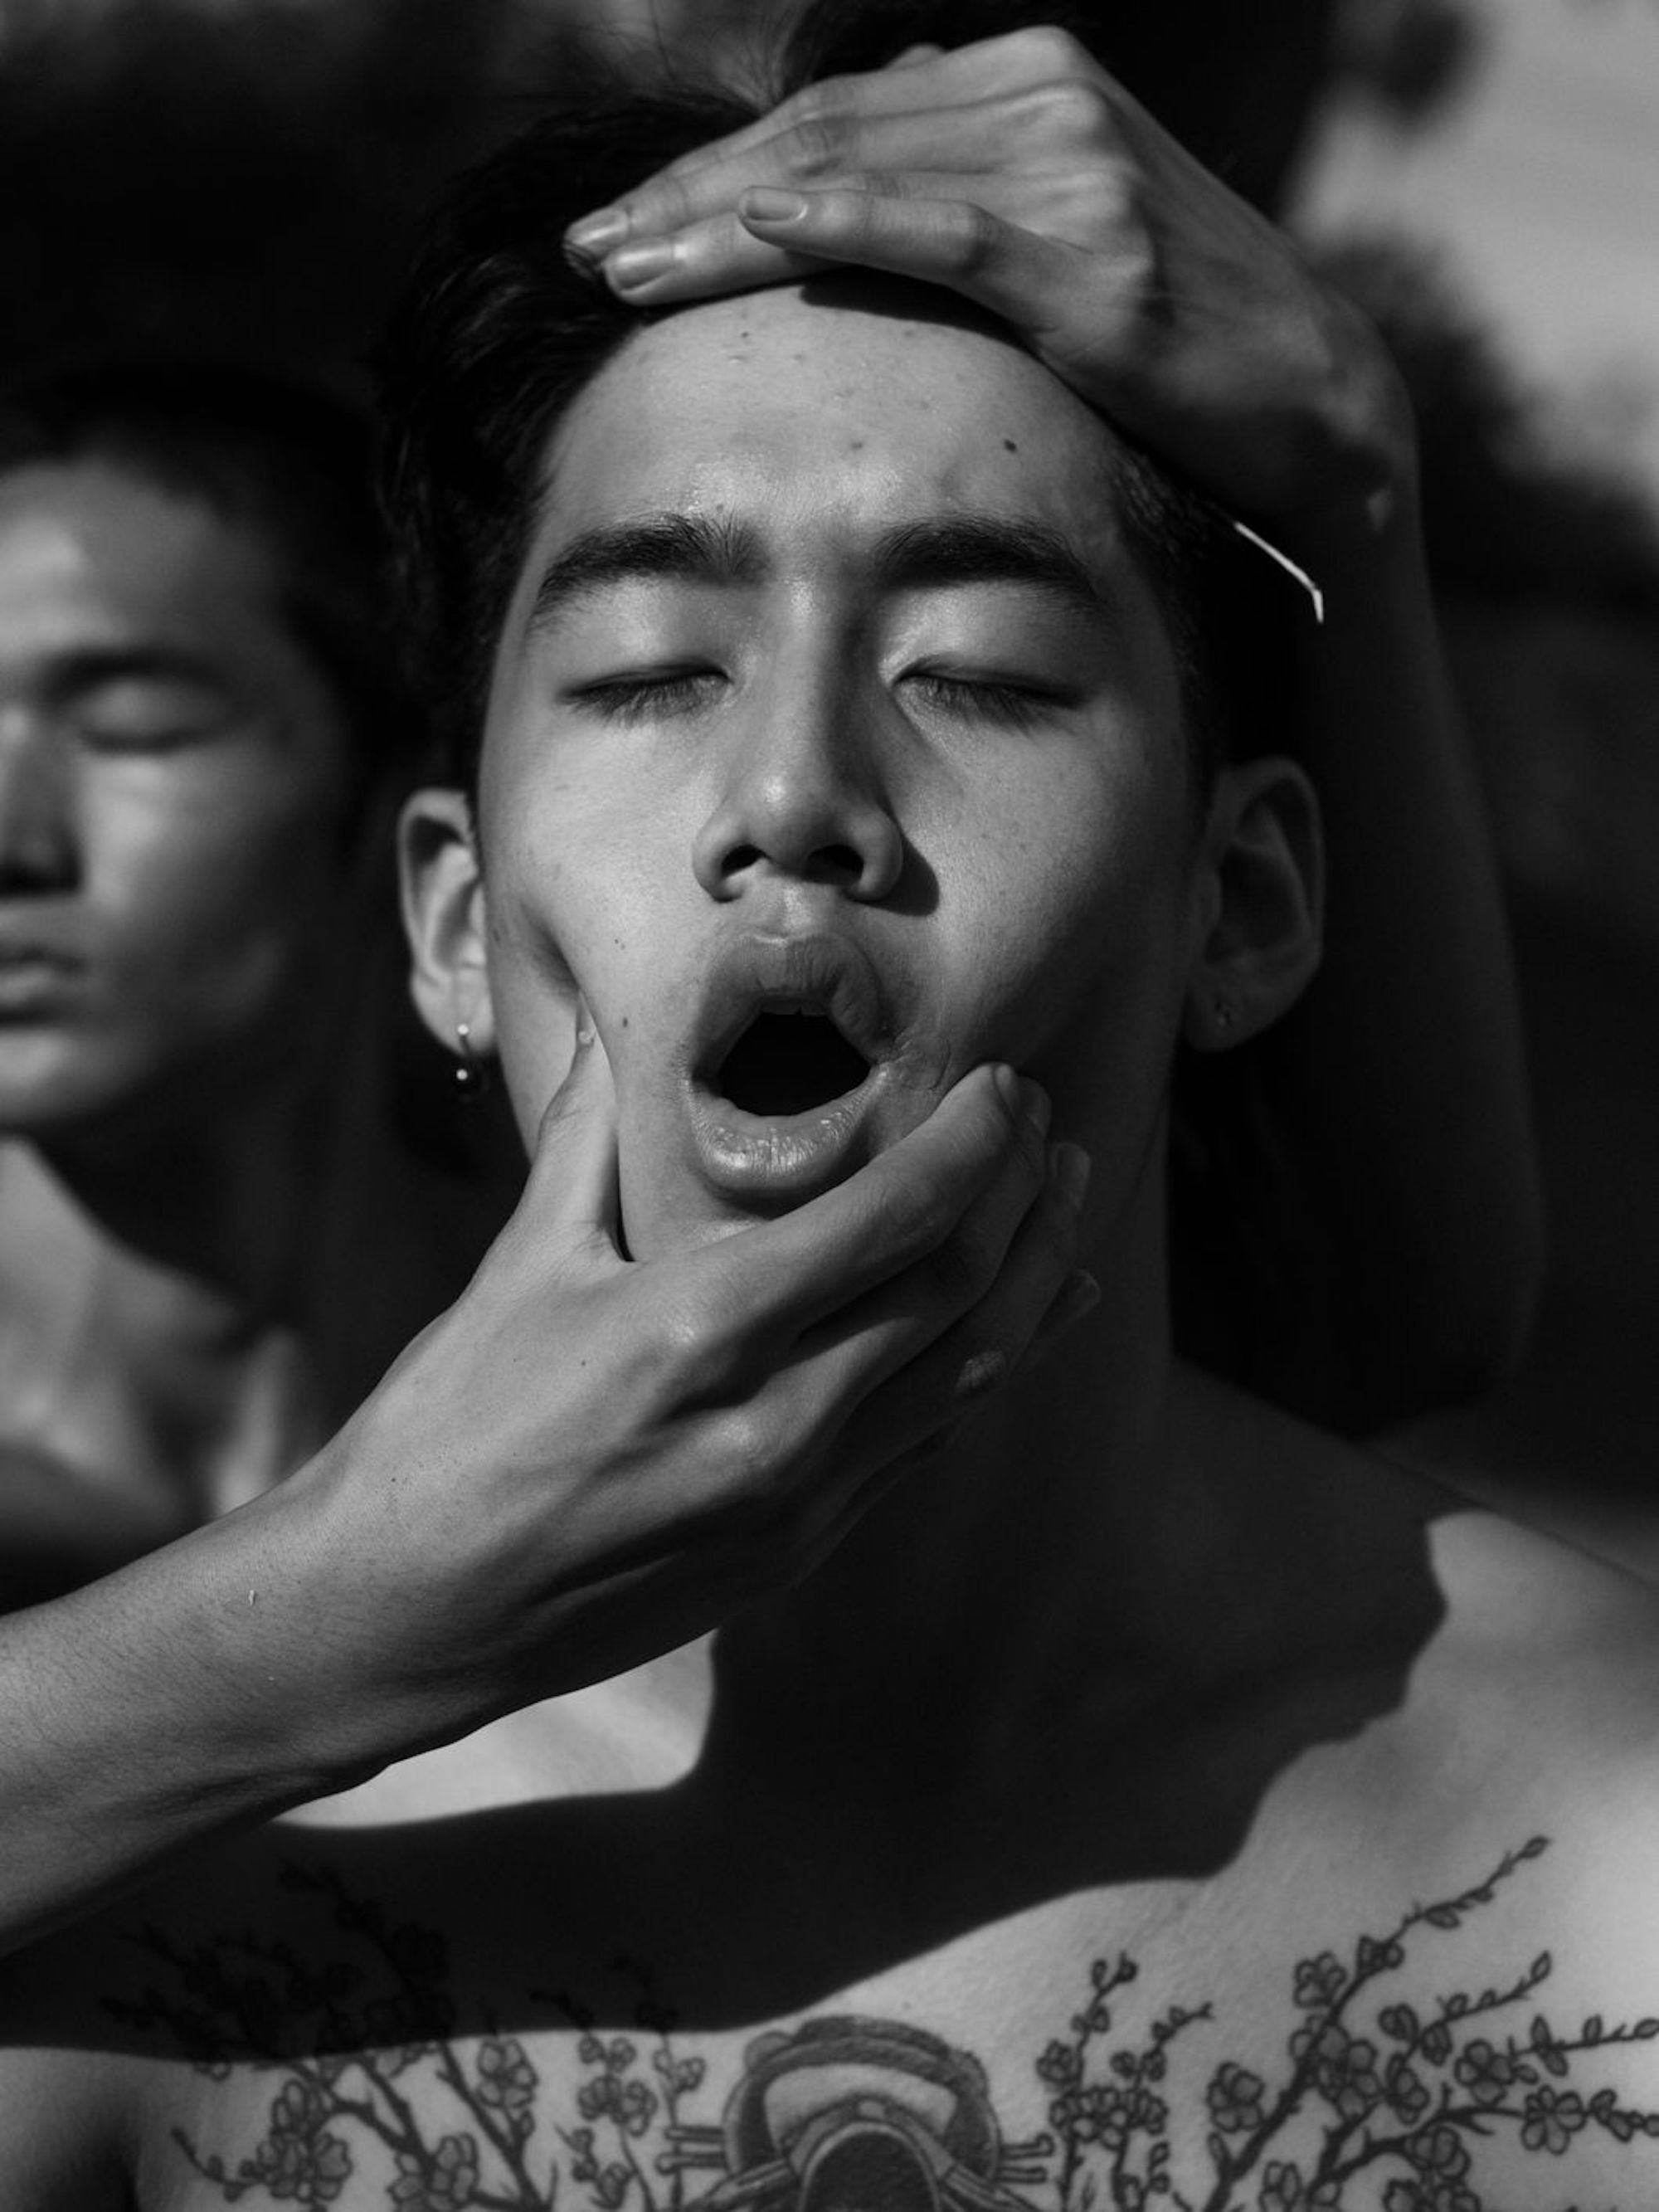 Black and white portrait of a man's face, eyes closed and mouth gaping. Part of his tattooed chest is visible and he wears a silver earring in his right ear lobe. His face is framed by two hands, grasping his head and squeezing his cheeks. In the background, half of the face of another person is visible. © Ricardo Nagaoka